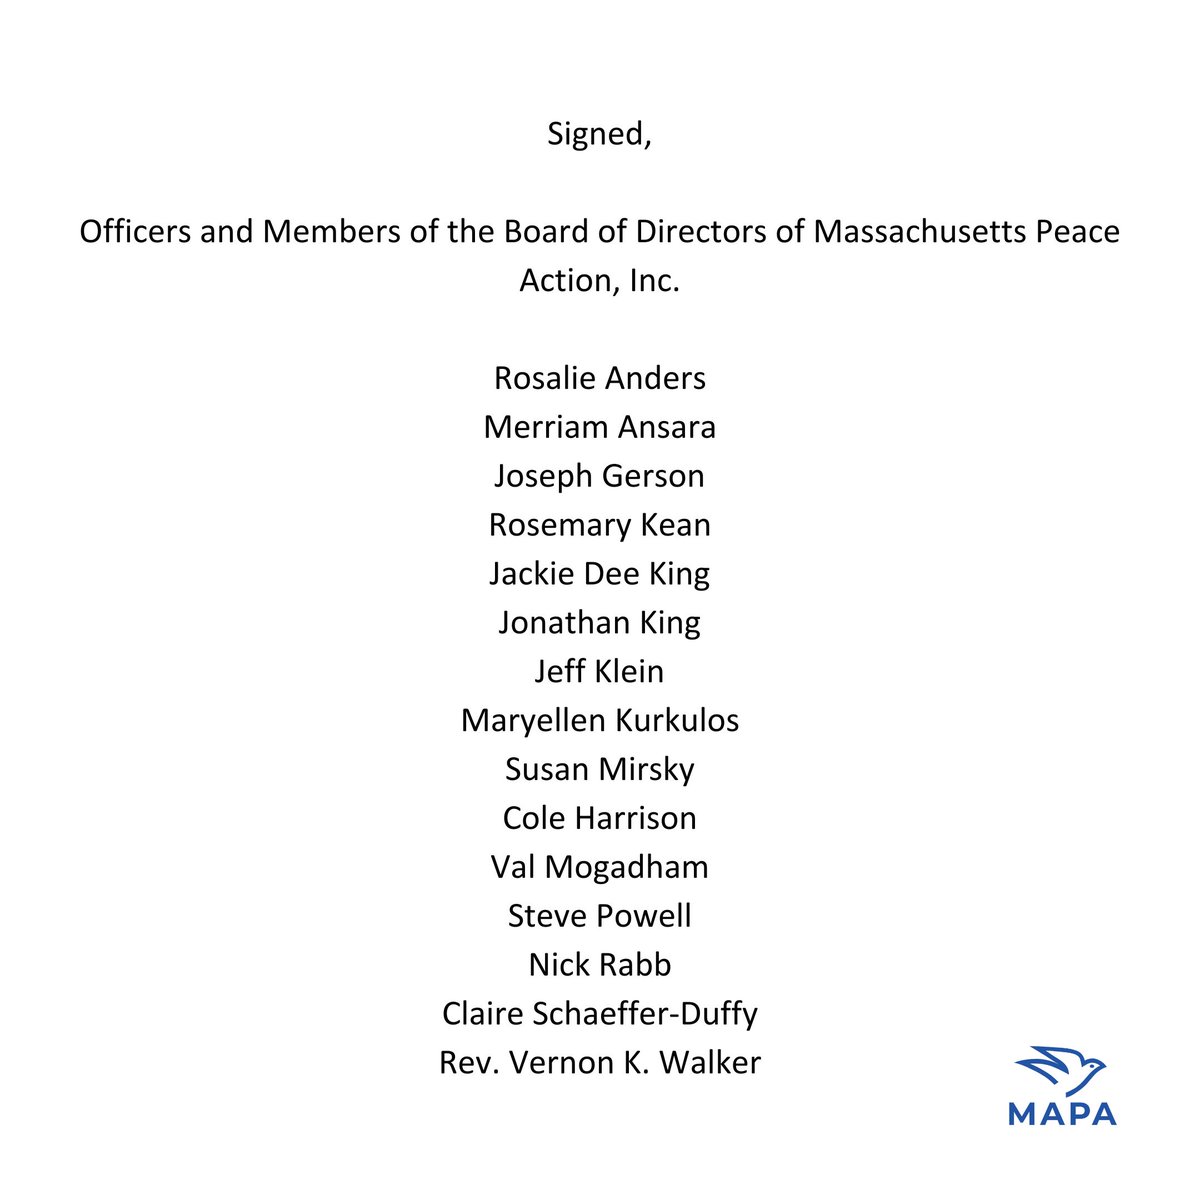 On April 30th, 2024, Officers and Members of the Board of Directors of Massachusetts Peace Action sent this letter to university presidents and administrators at MIT, Northeastern, Harvard, UMass Amherst, Smith, Emerson, and Tufts.